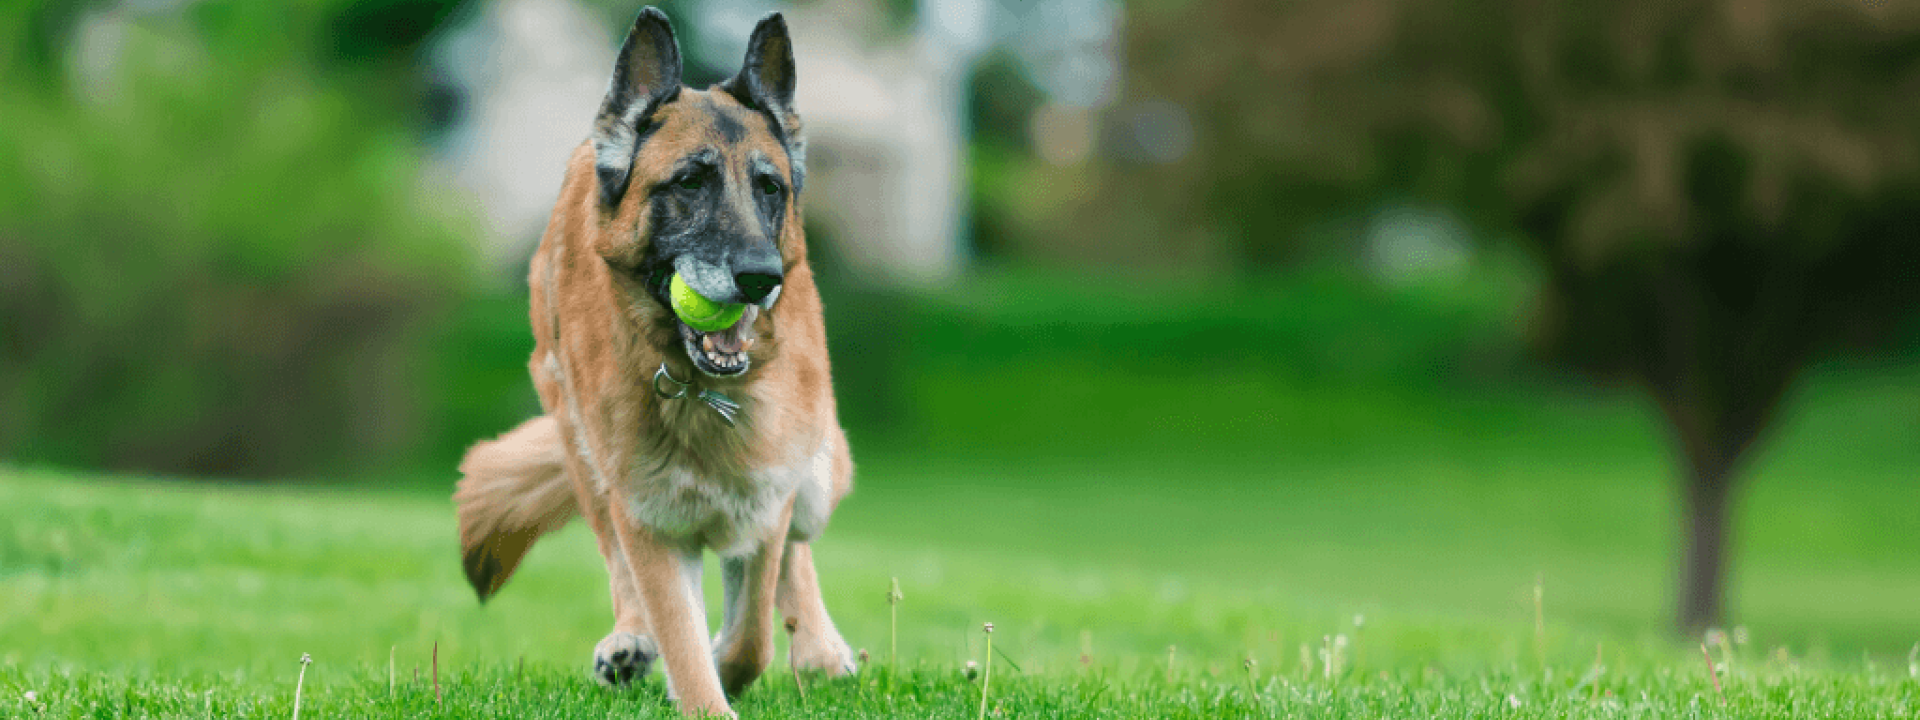 Old purebred German Shepherd Dog outside in grass.